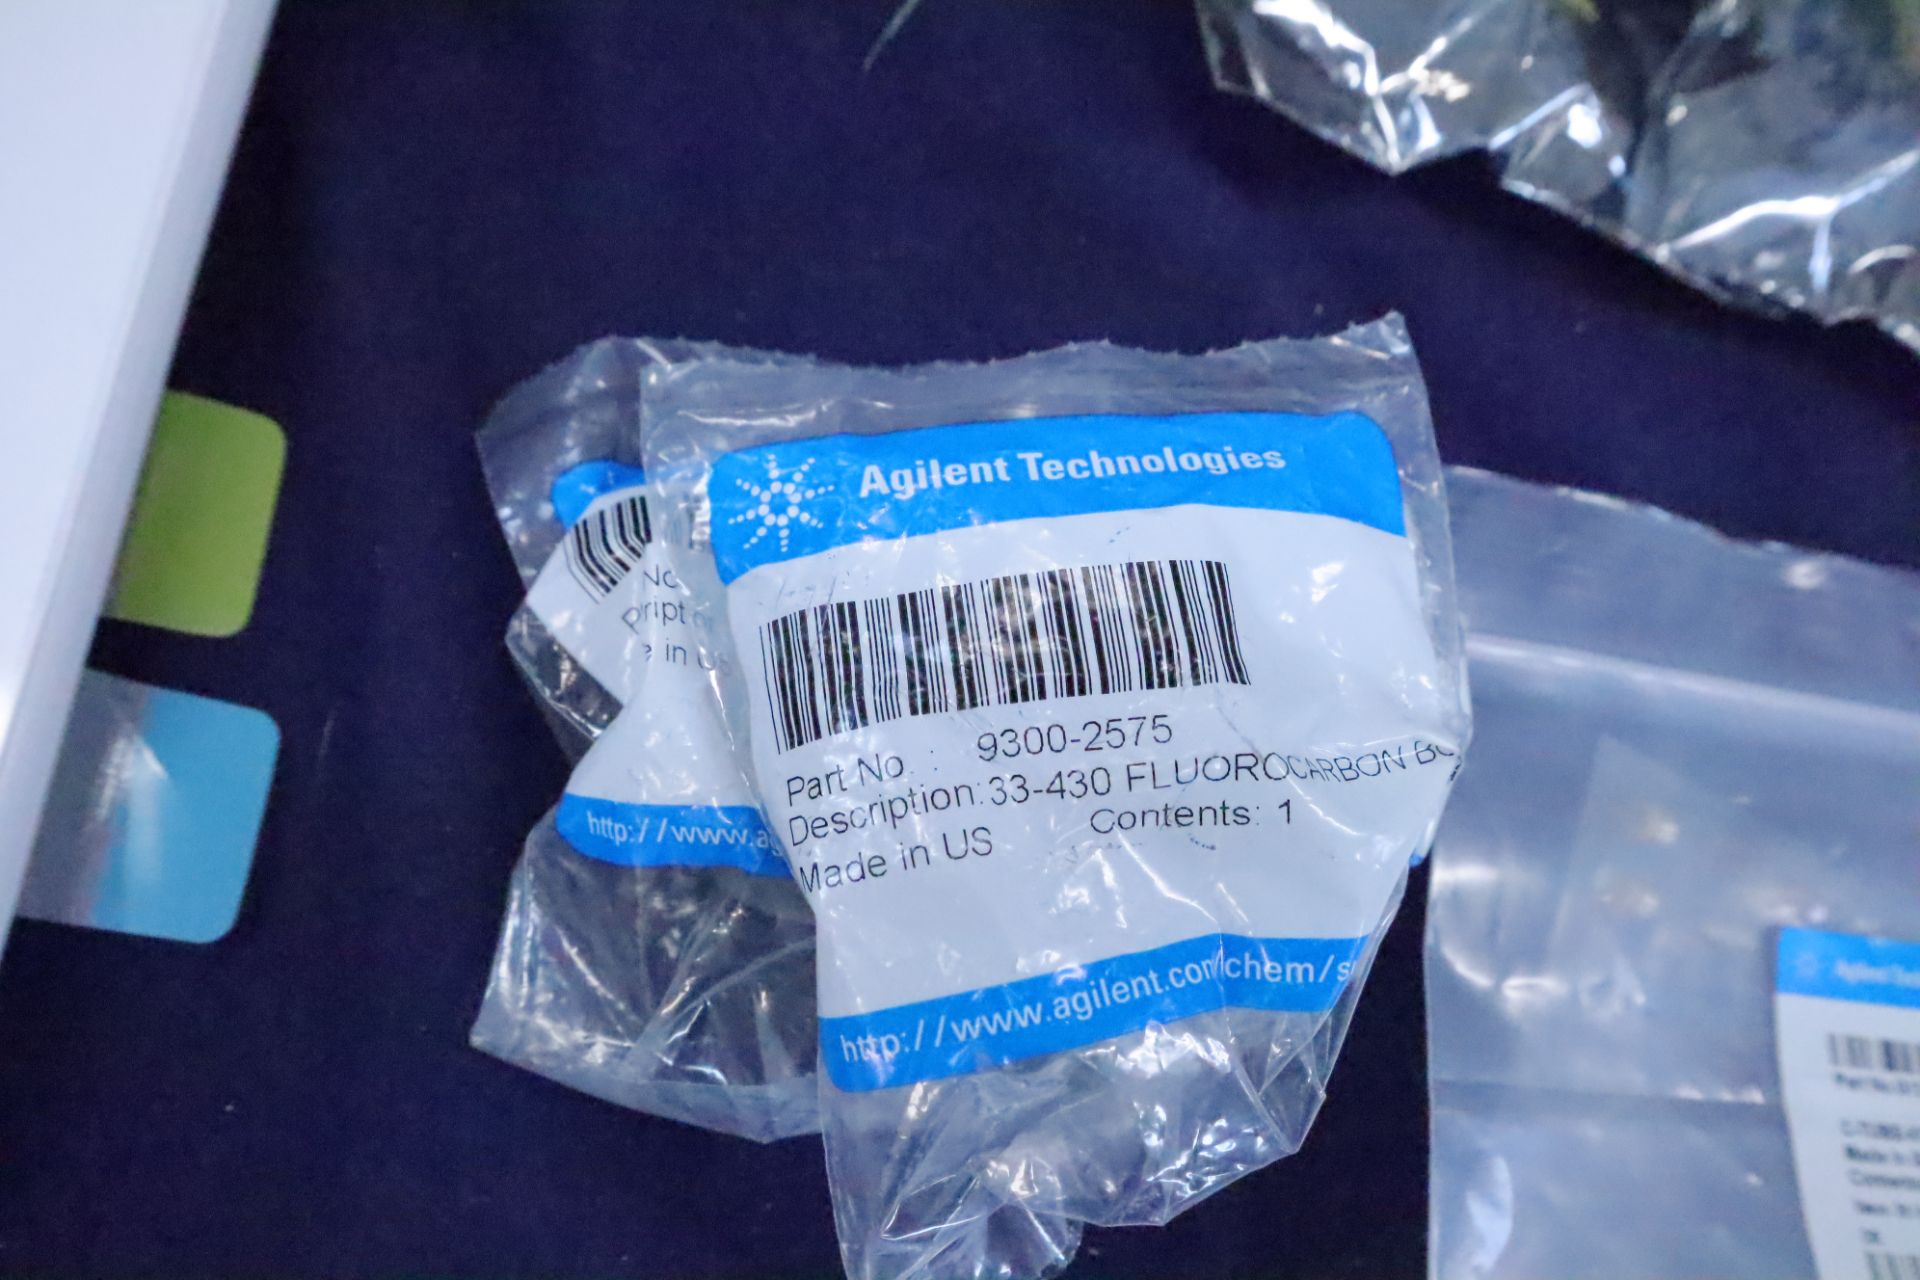 Agilent Technologies OEM Replacement Parts, Booklets and Recovery Drive - Image 30 of 32